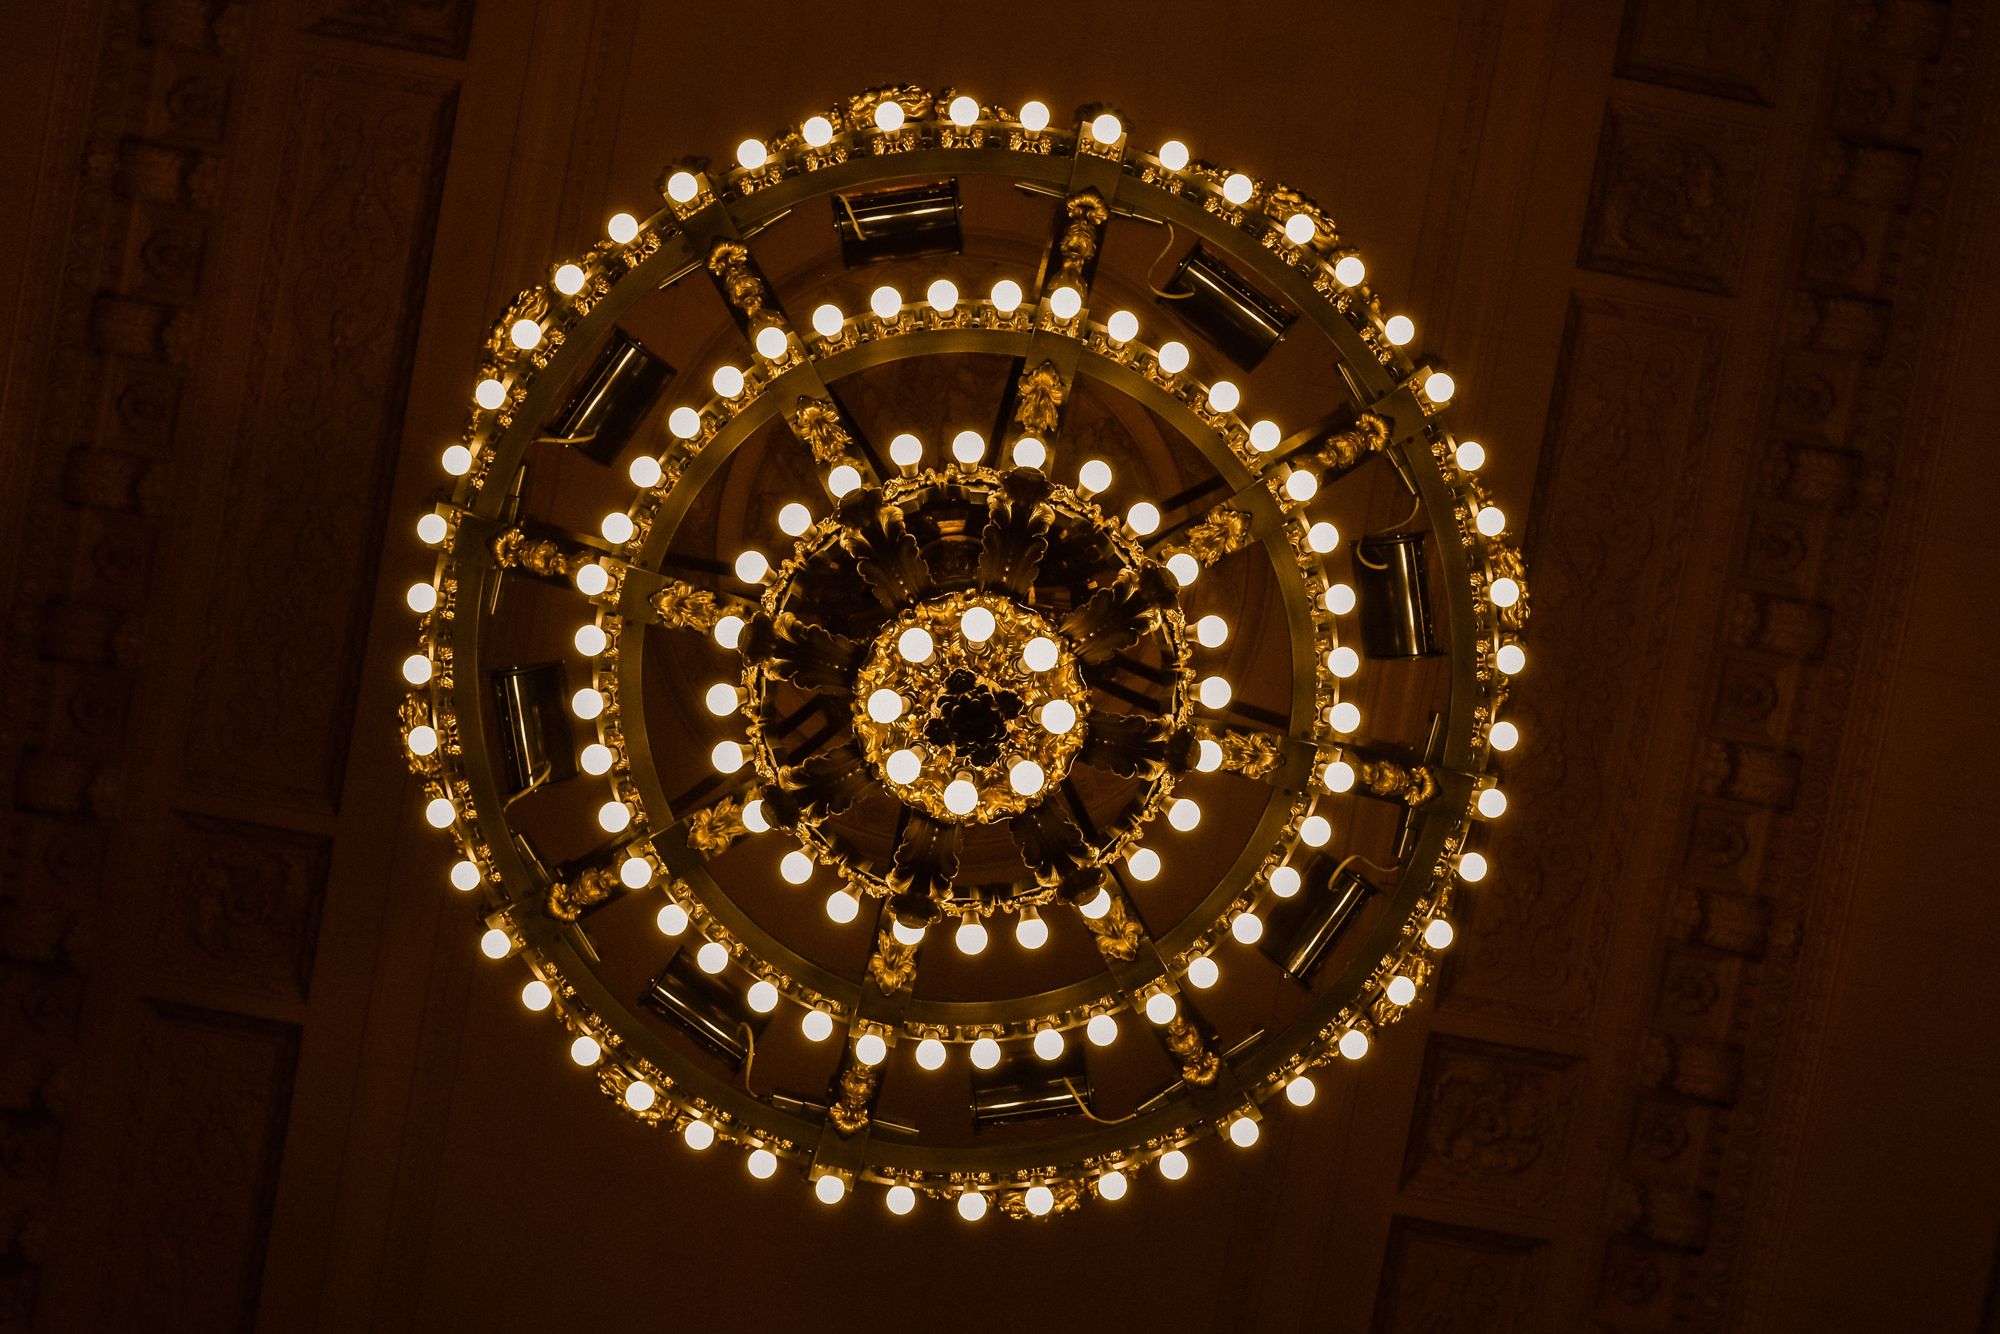 Grand Central Terminal Chandeliers.